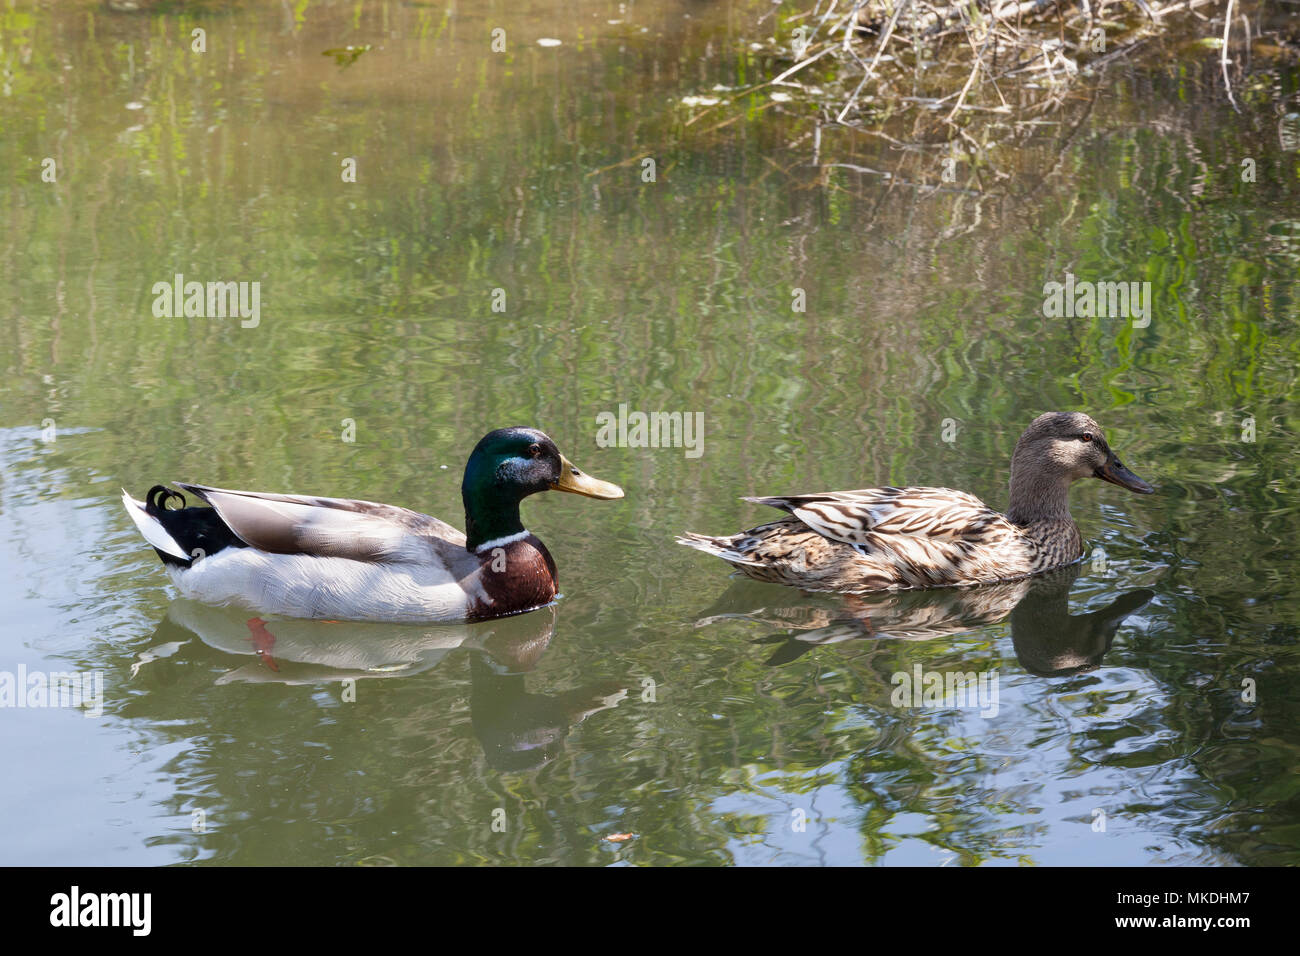 Breeding pair of Mallard ducks, Anas platyrhynchos, swimming  with reflection in a saltwater canal in spring. Closeup profile view Stock Photo